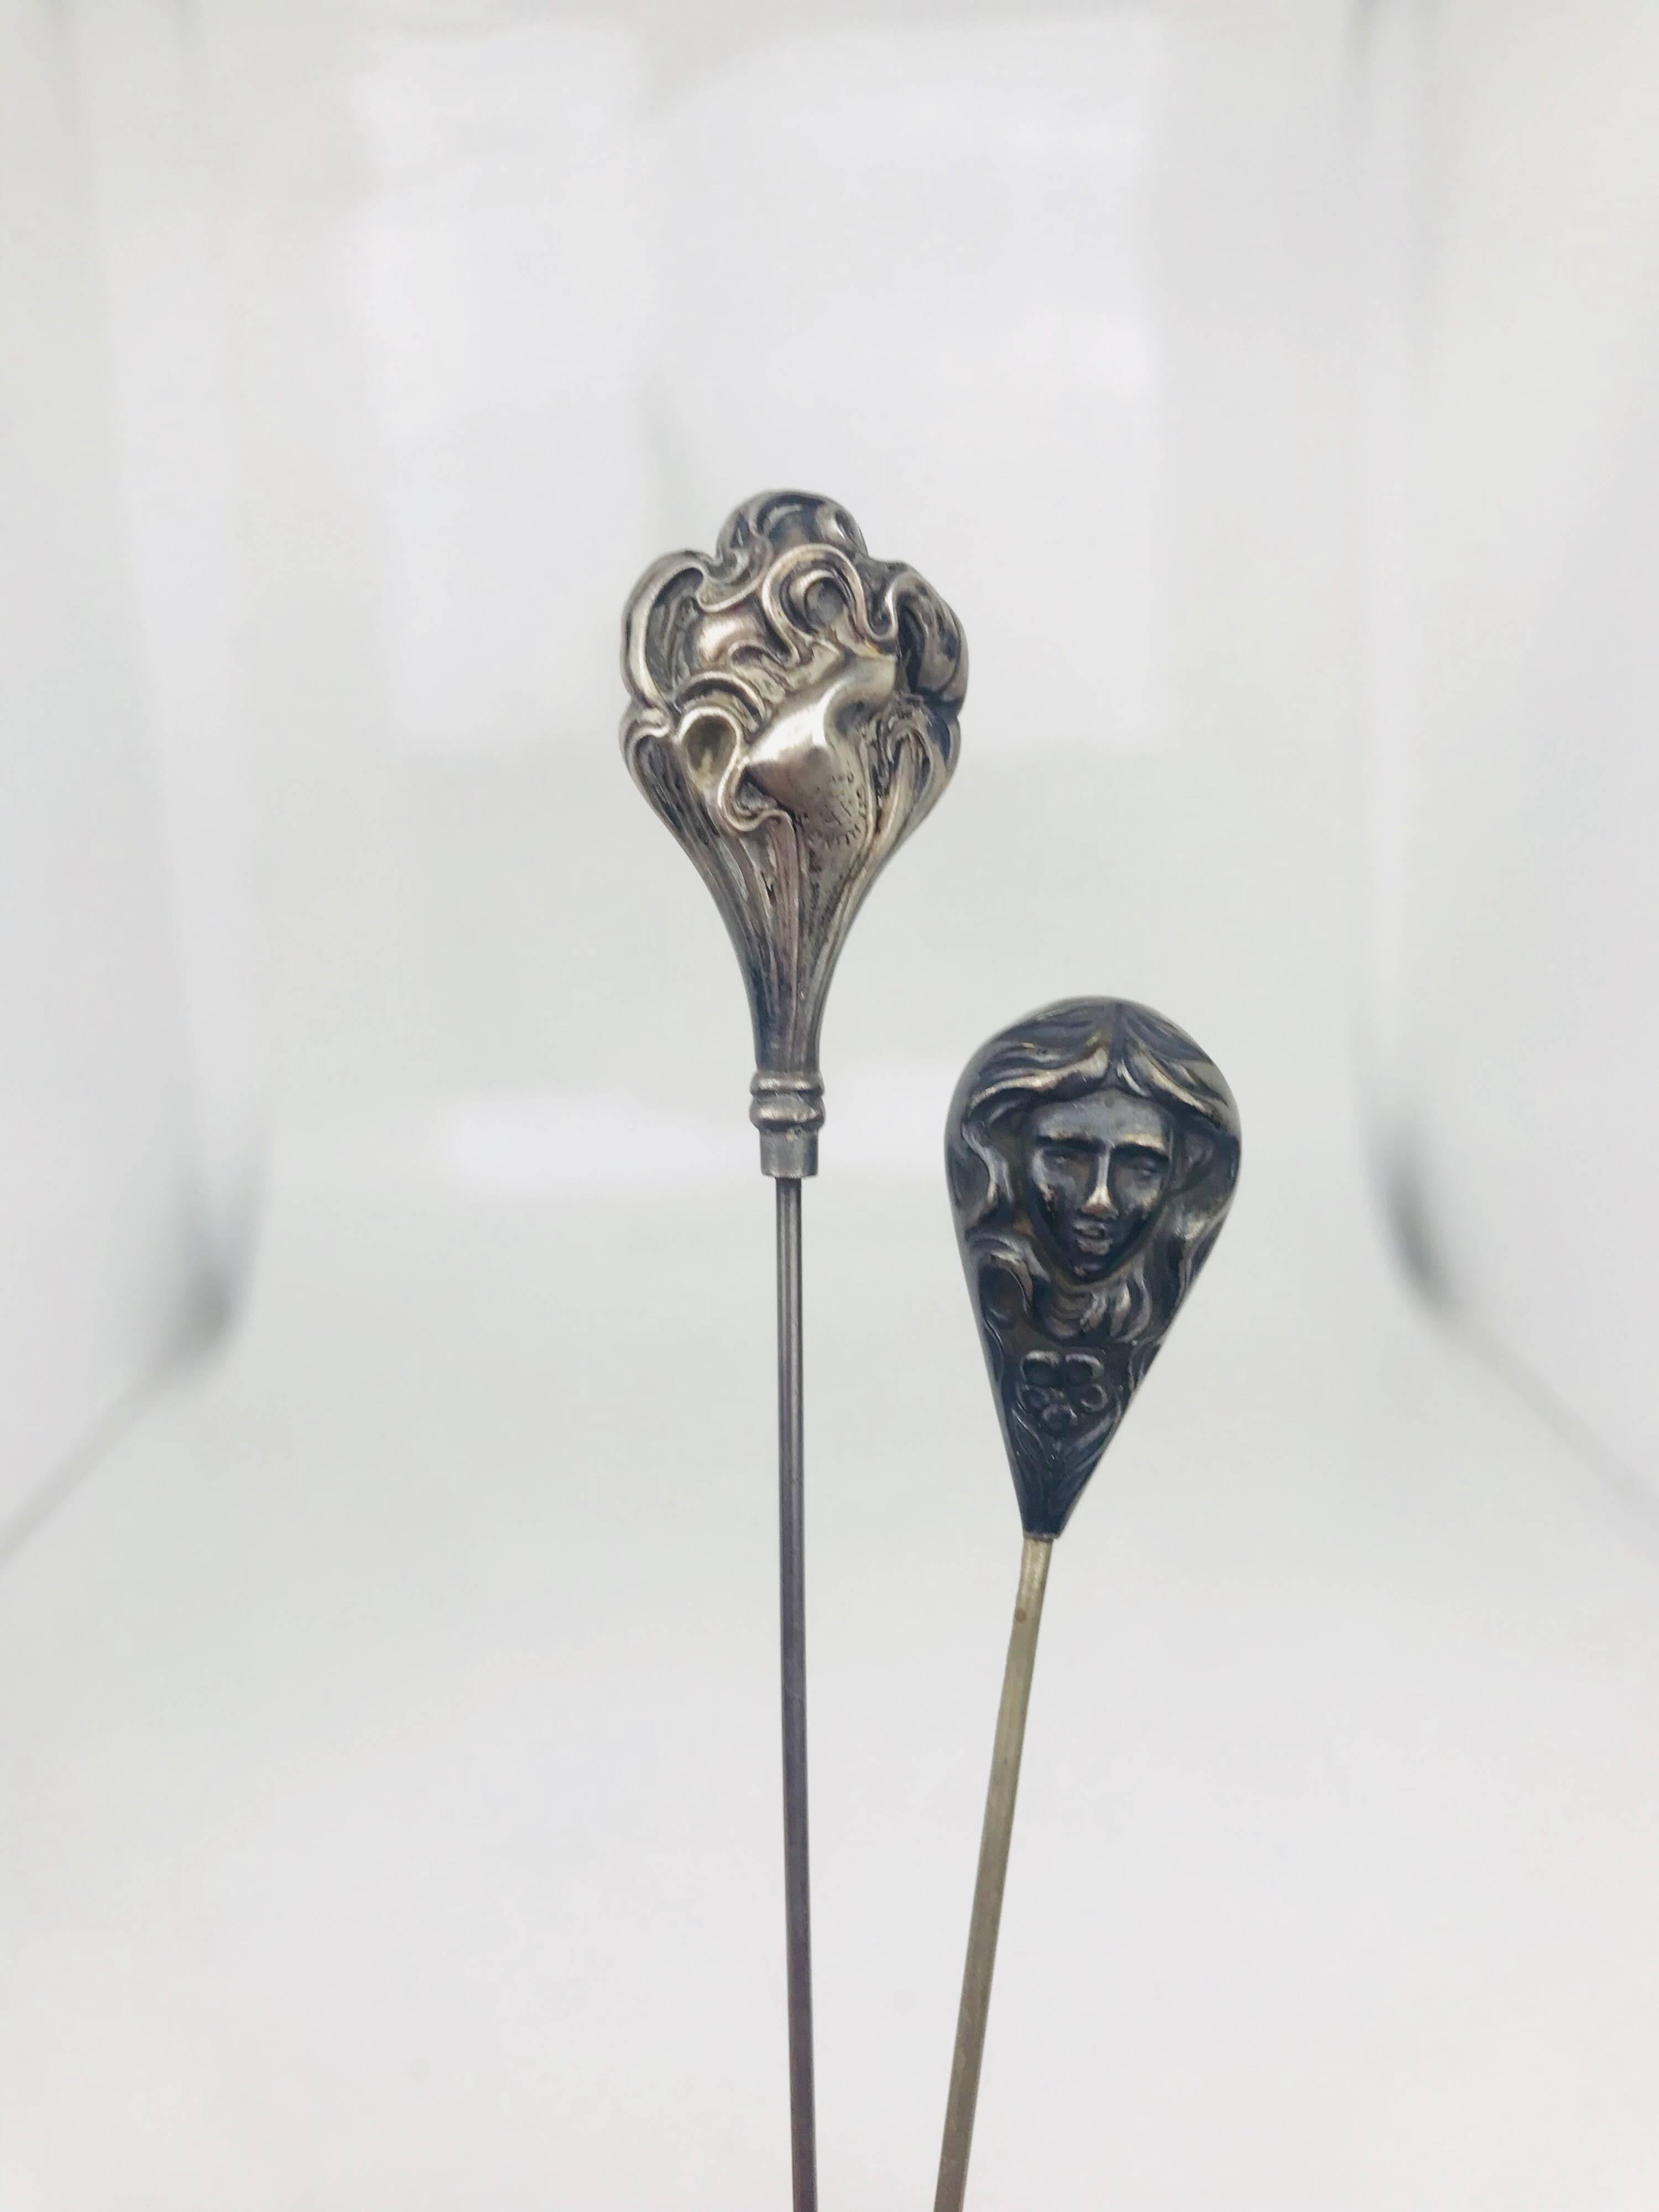 Victorian Sterling Silver Hat Pin Pair feature Pear-Shaped, Stylized, Hollow Heads.
Circa 1890
 
The smaller hat pin depicts a woman's head and face with long, flowing hair and a flower beneath the chin.  It is two-faced, identical on both sides.